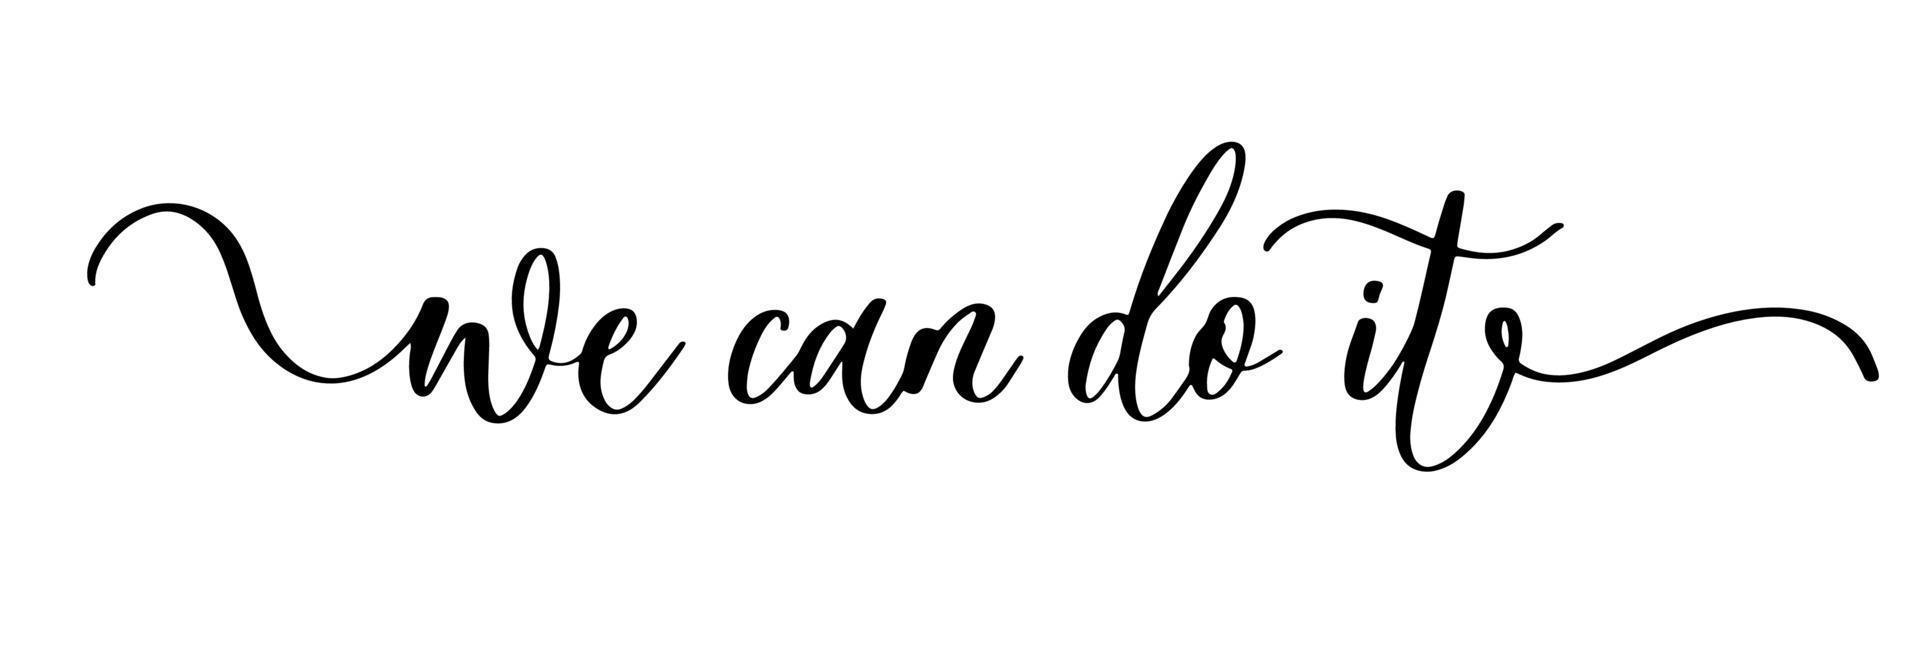 We can do it - vector brush calligraphy banner.